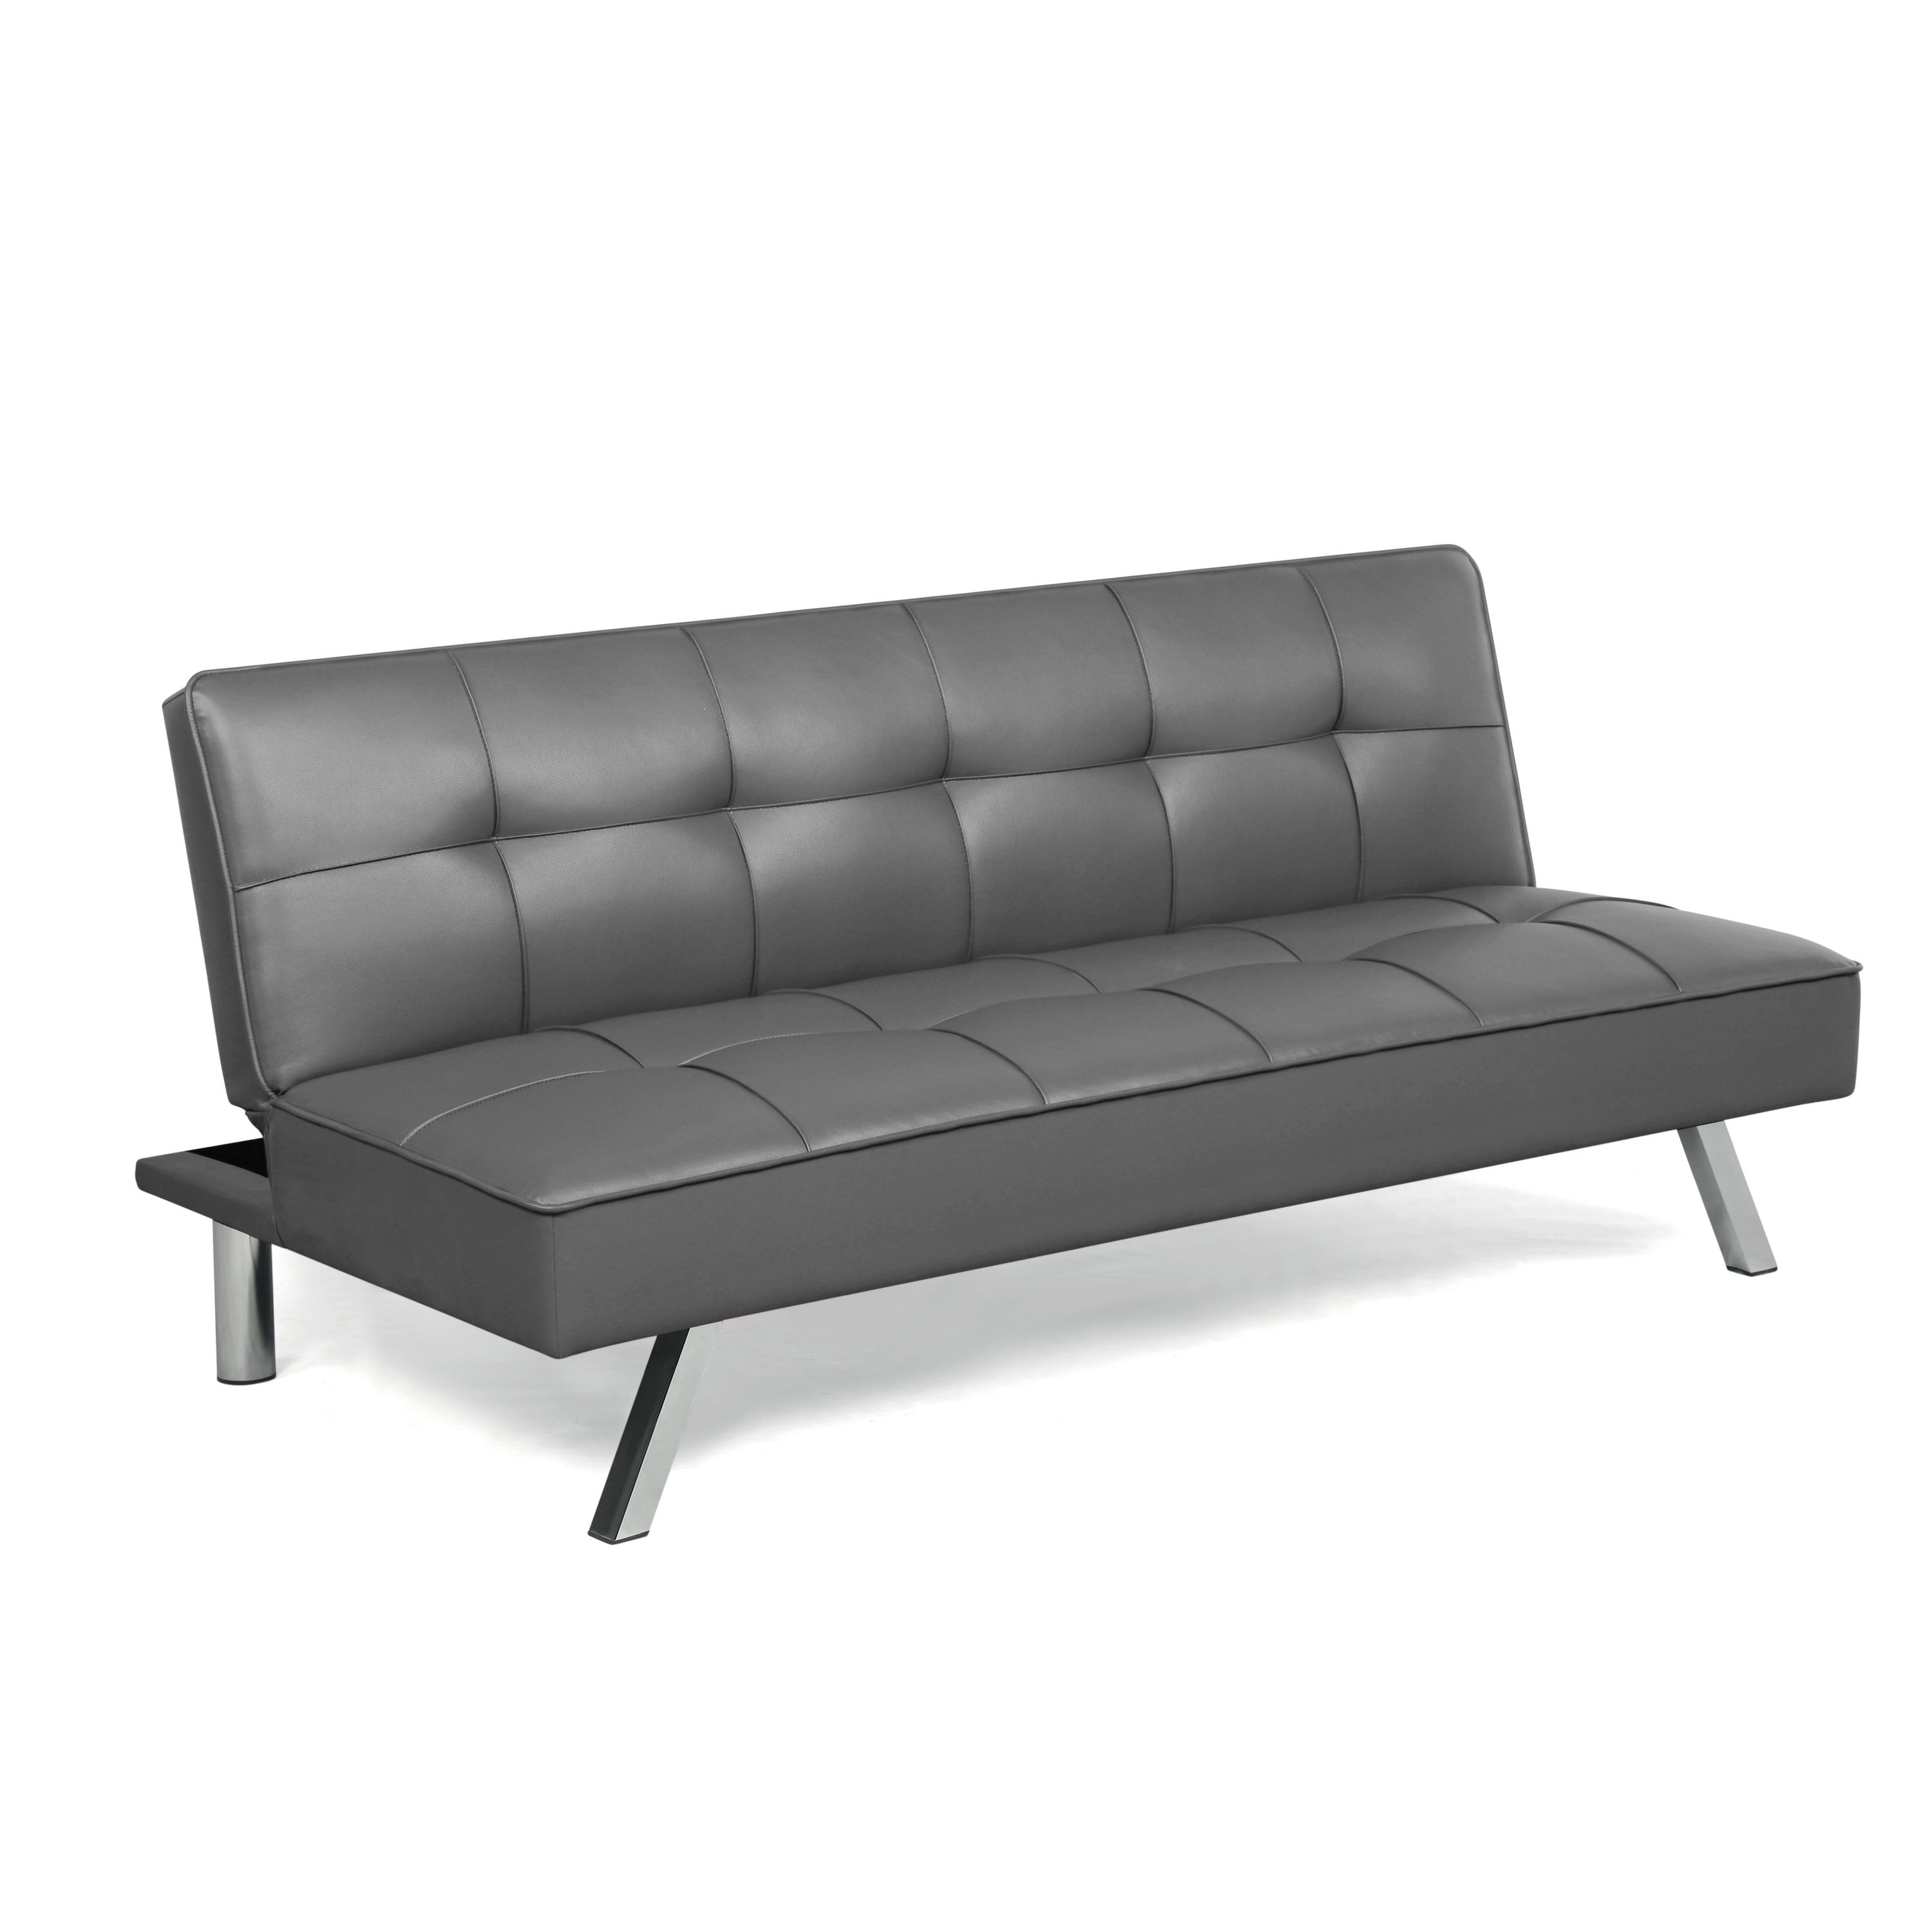 Serta Grey Polyester/Blend Sofa in Couches, & Loveseats department at Lowes.com